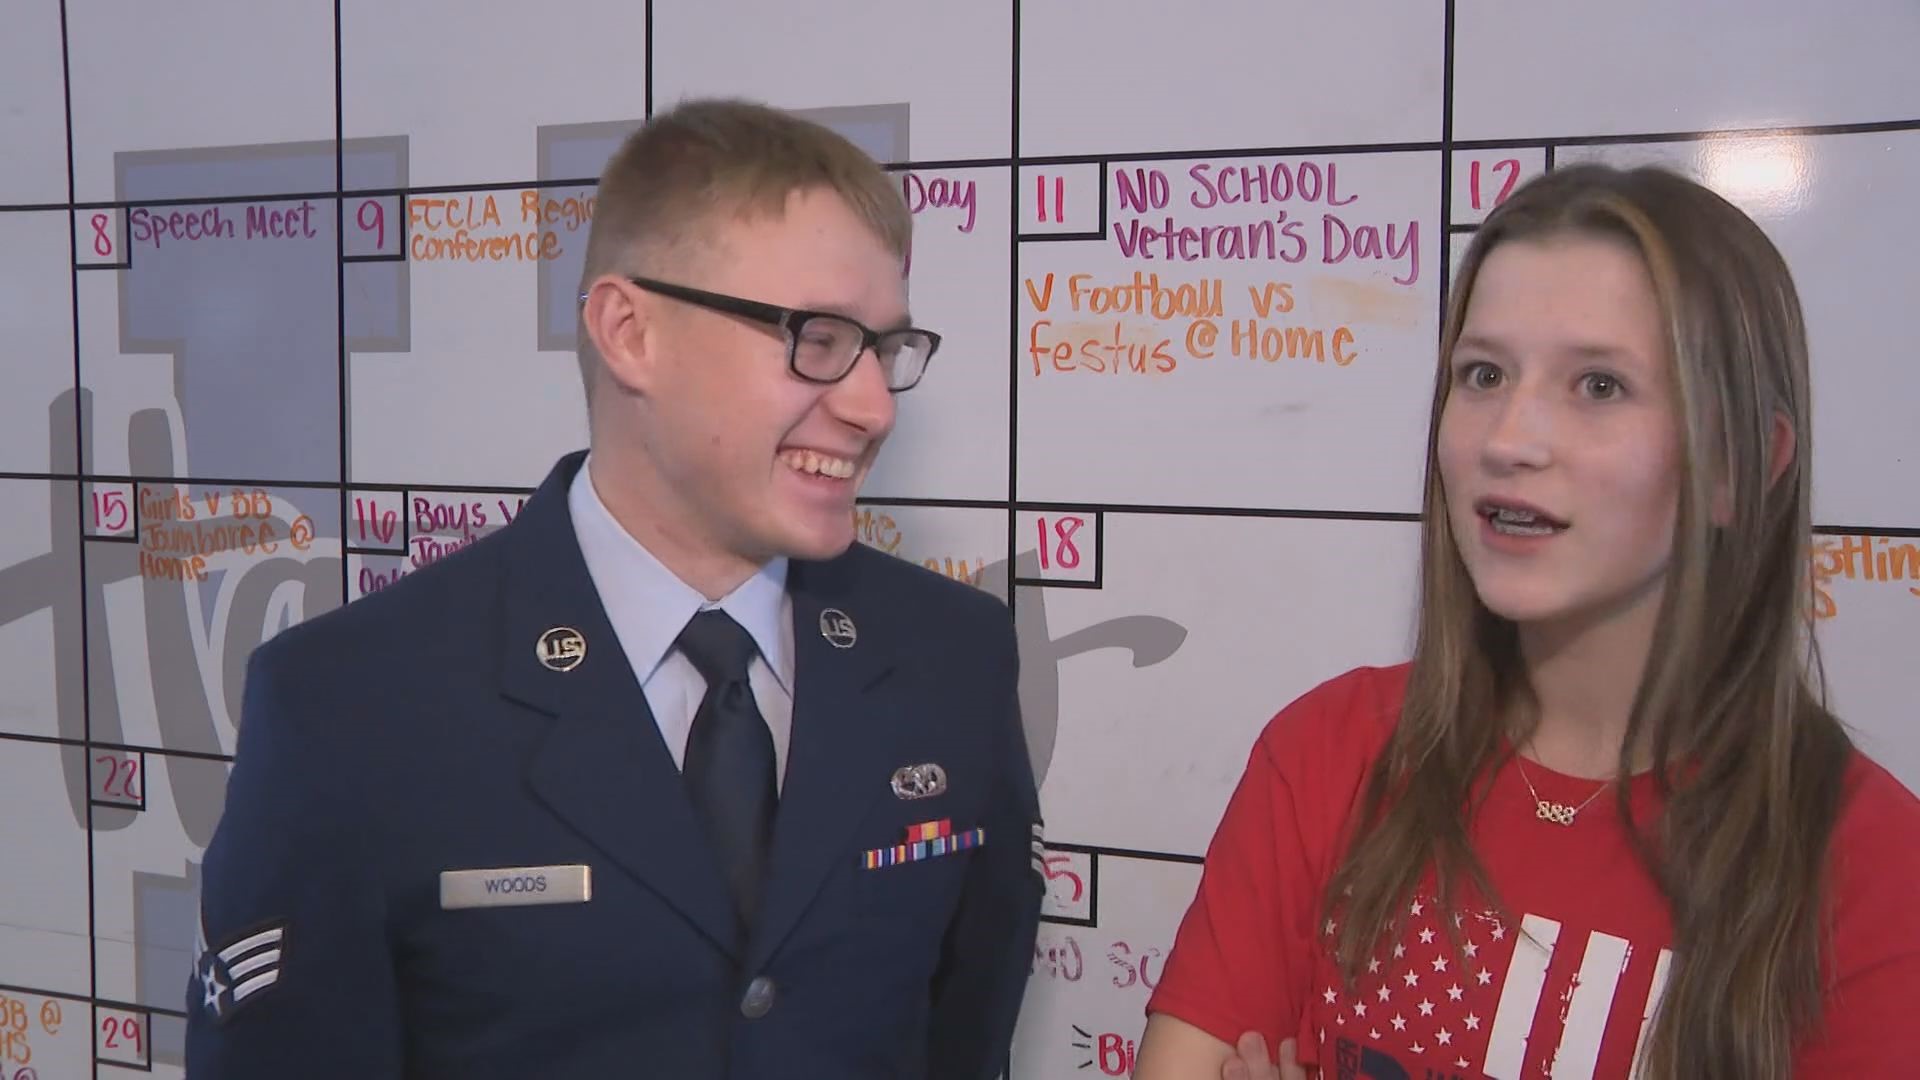 After an 18-month deployment, an airman came home to surprise his sister who is a high school student. The airman surprised her at Hillsboro High School.